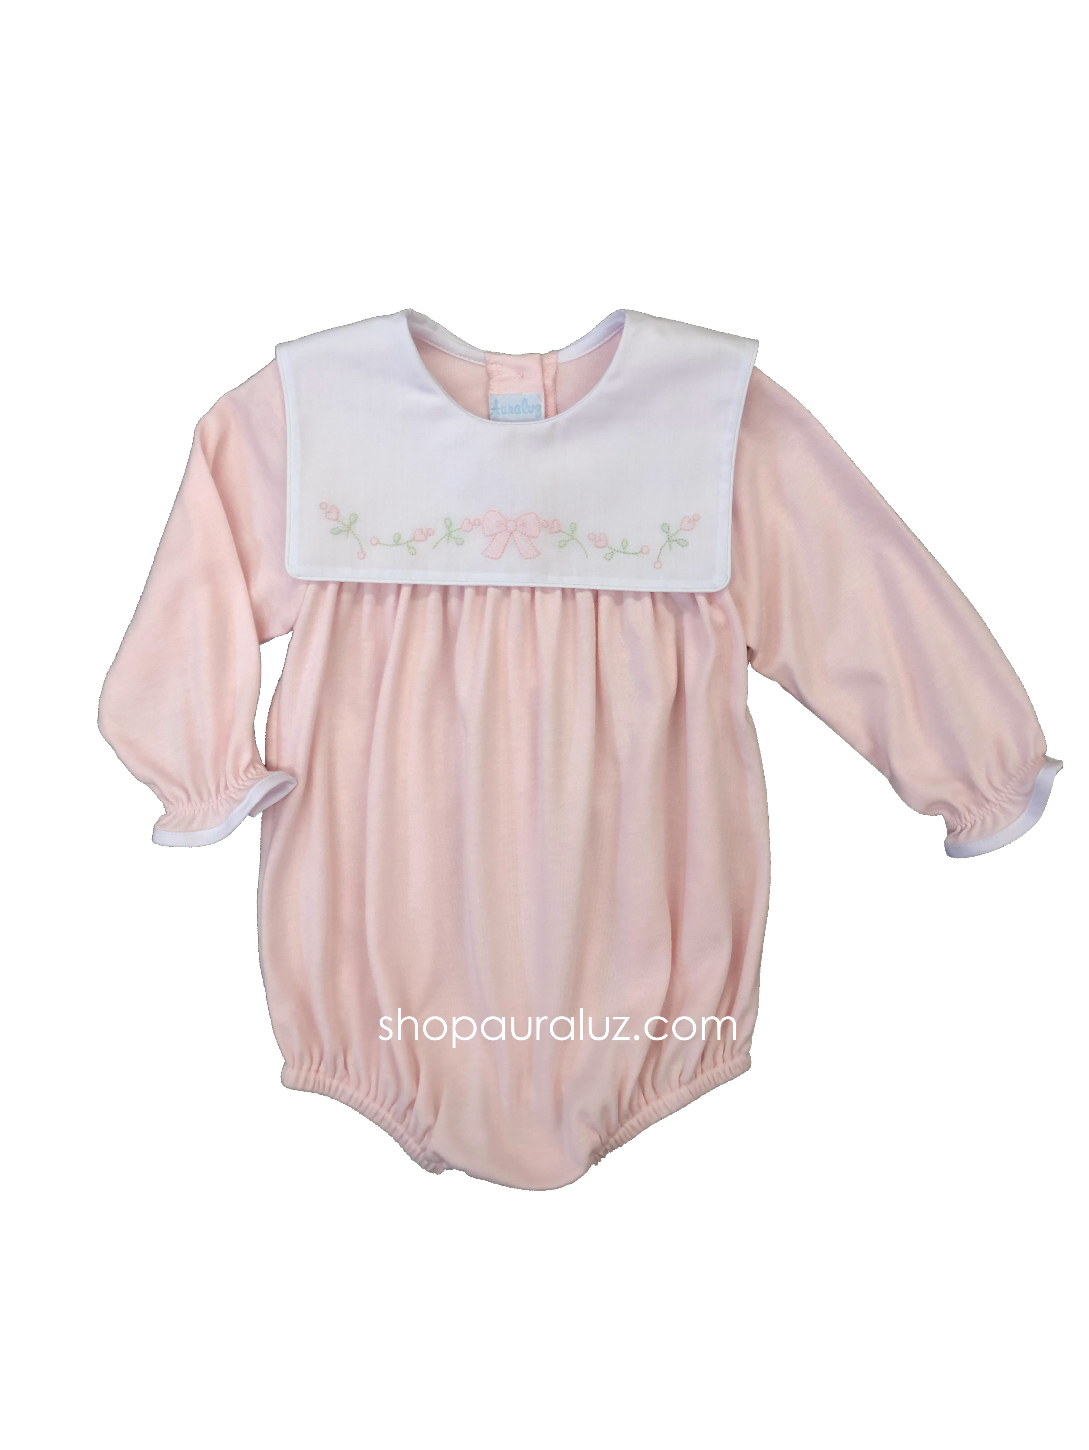 Auraluz Knit Bubble l/s...Pink with sq.collar and embroidered bow